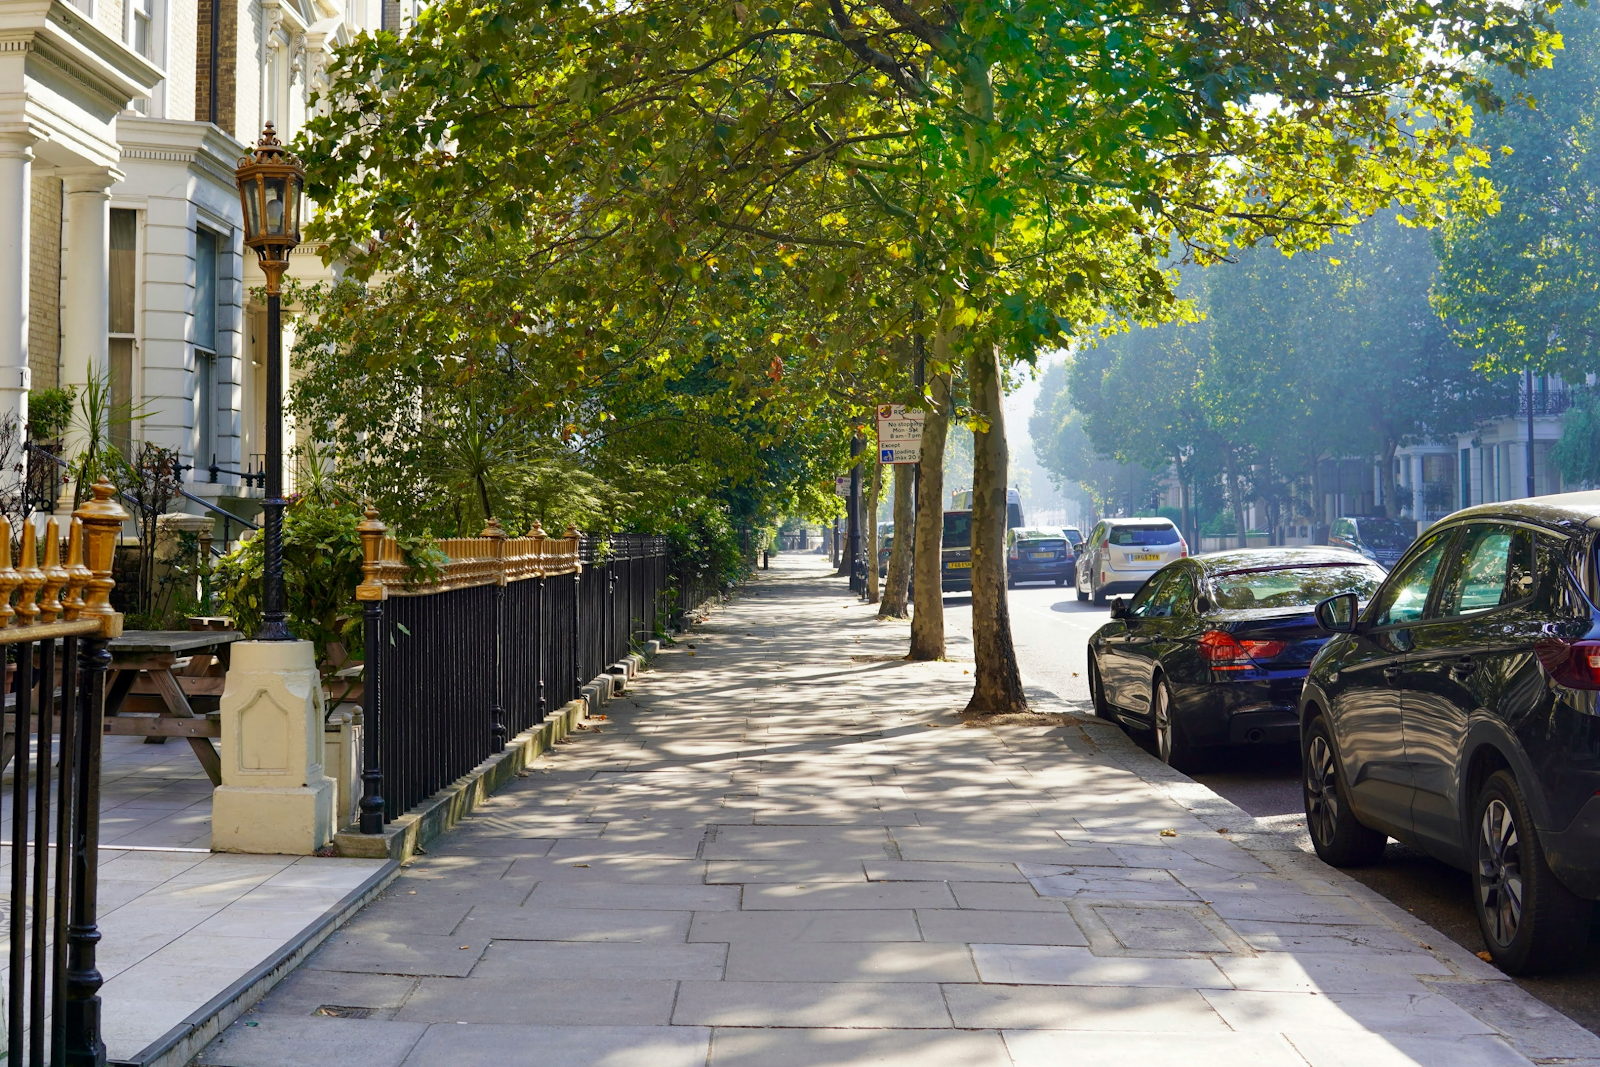 Residential city sidewalk lined with trees.